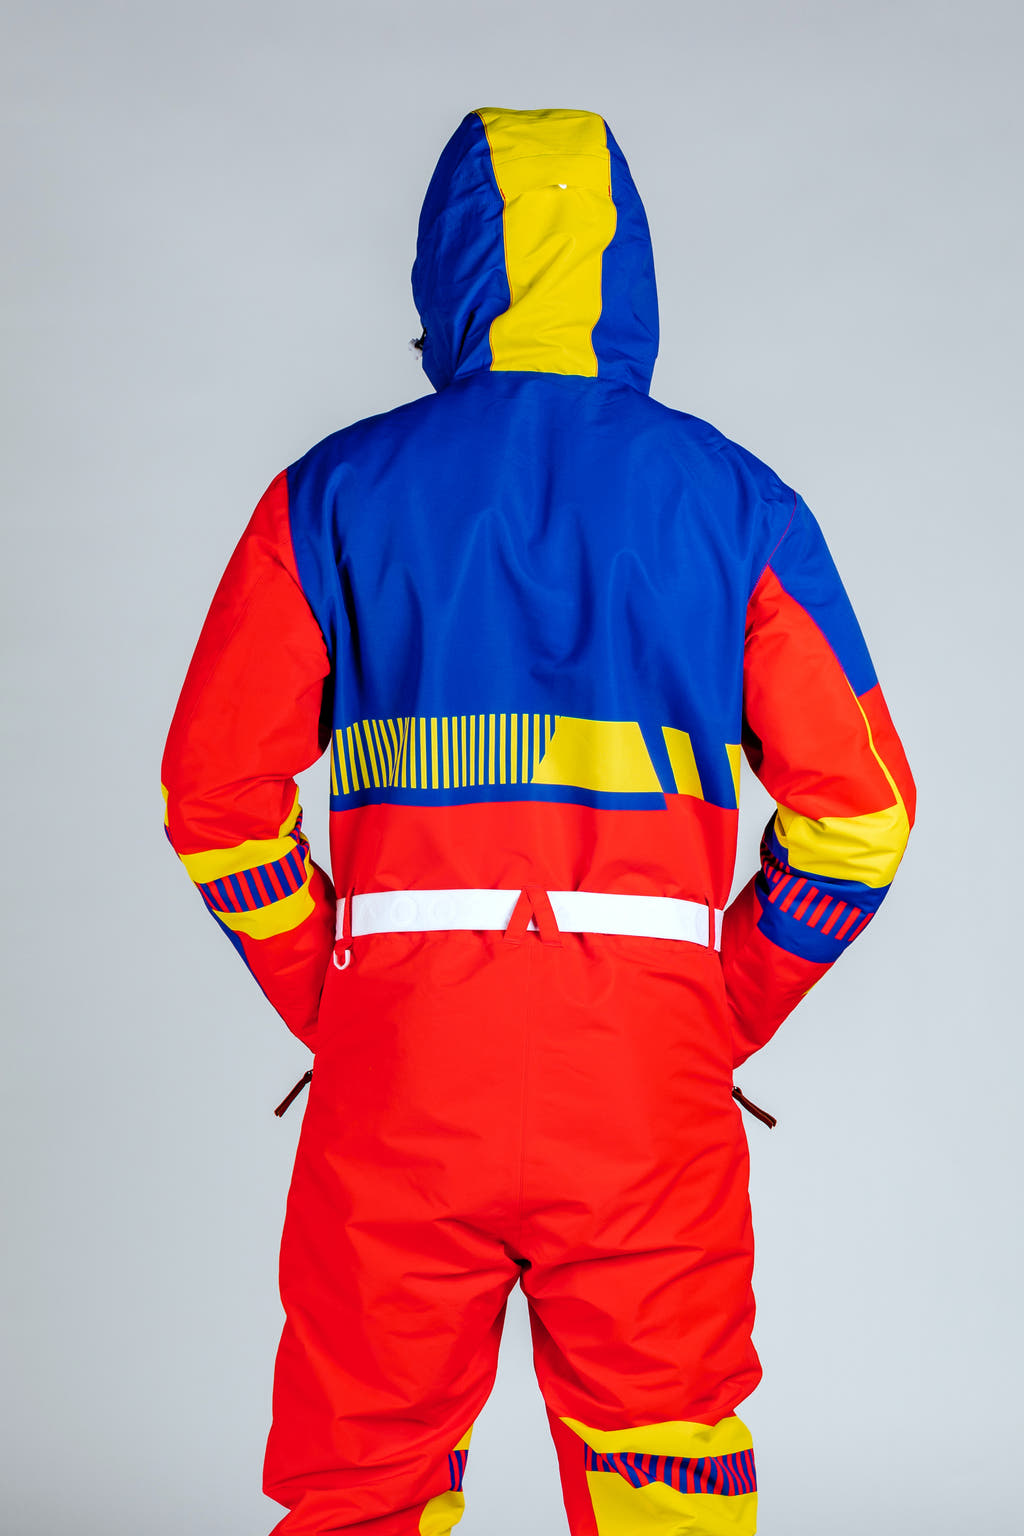 A person in a vintage ski suit, reminiscent of a fun-filled weekend in The Hot Tub Time Machine.